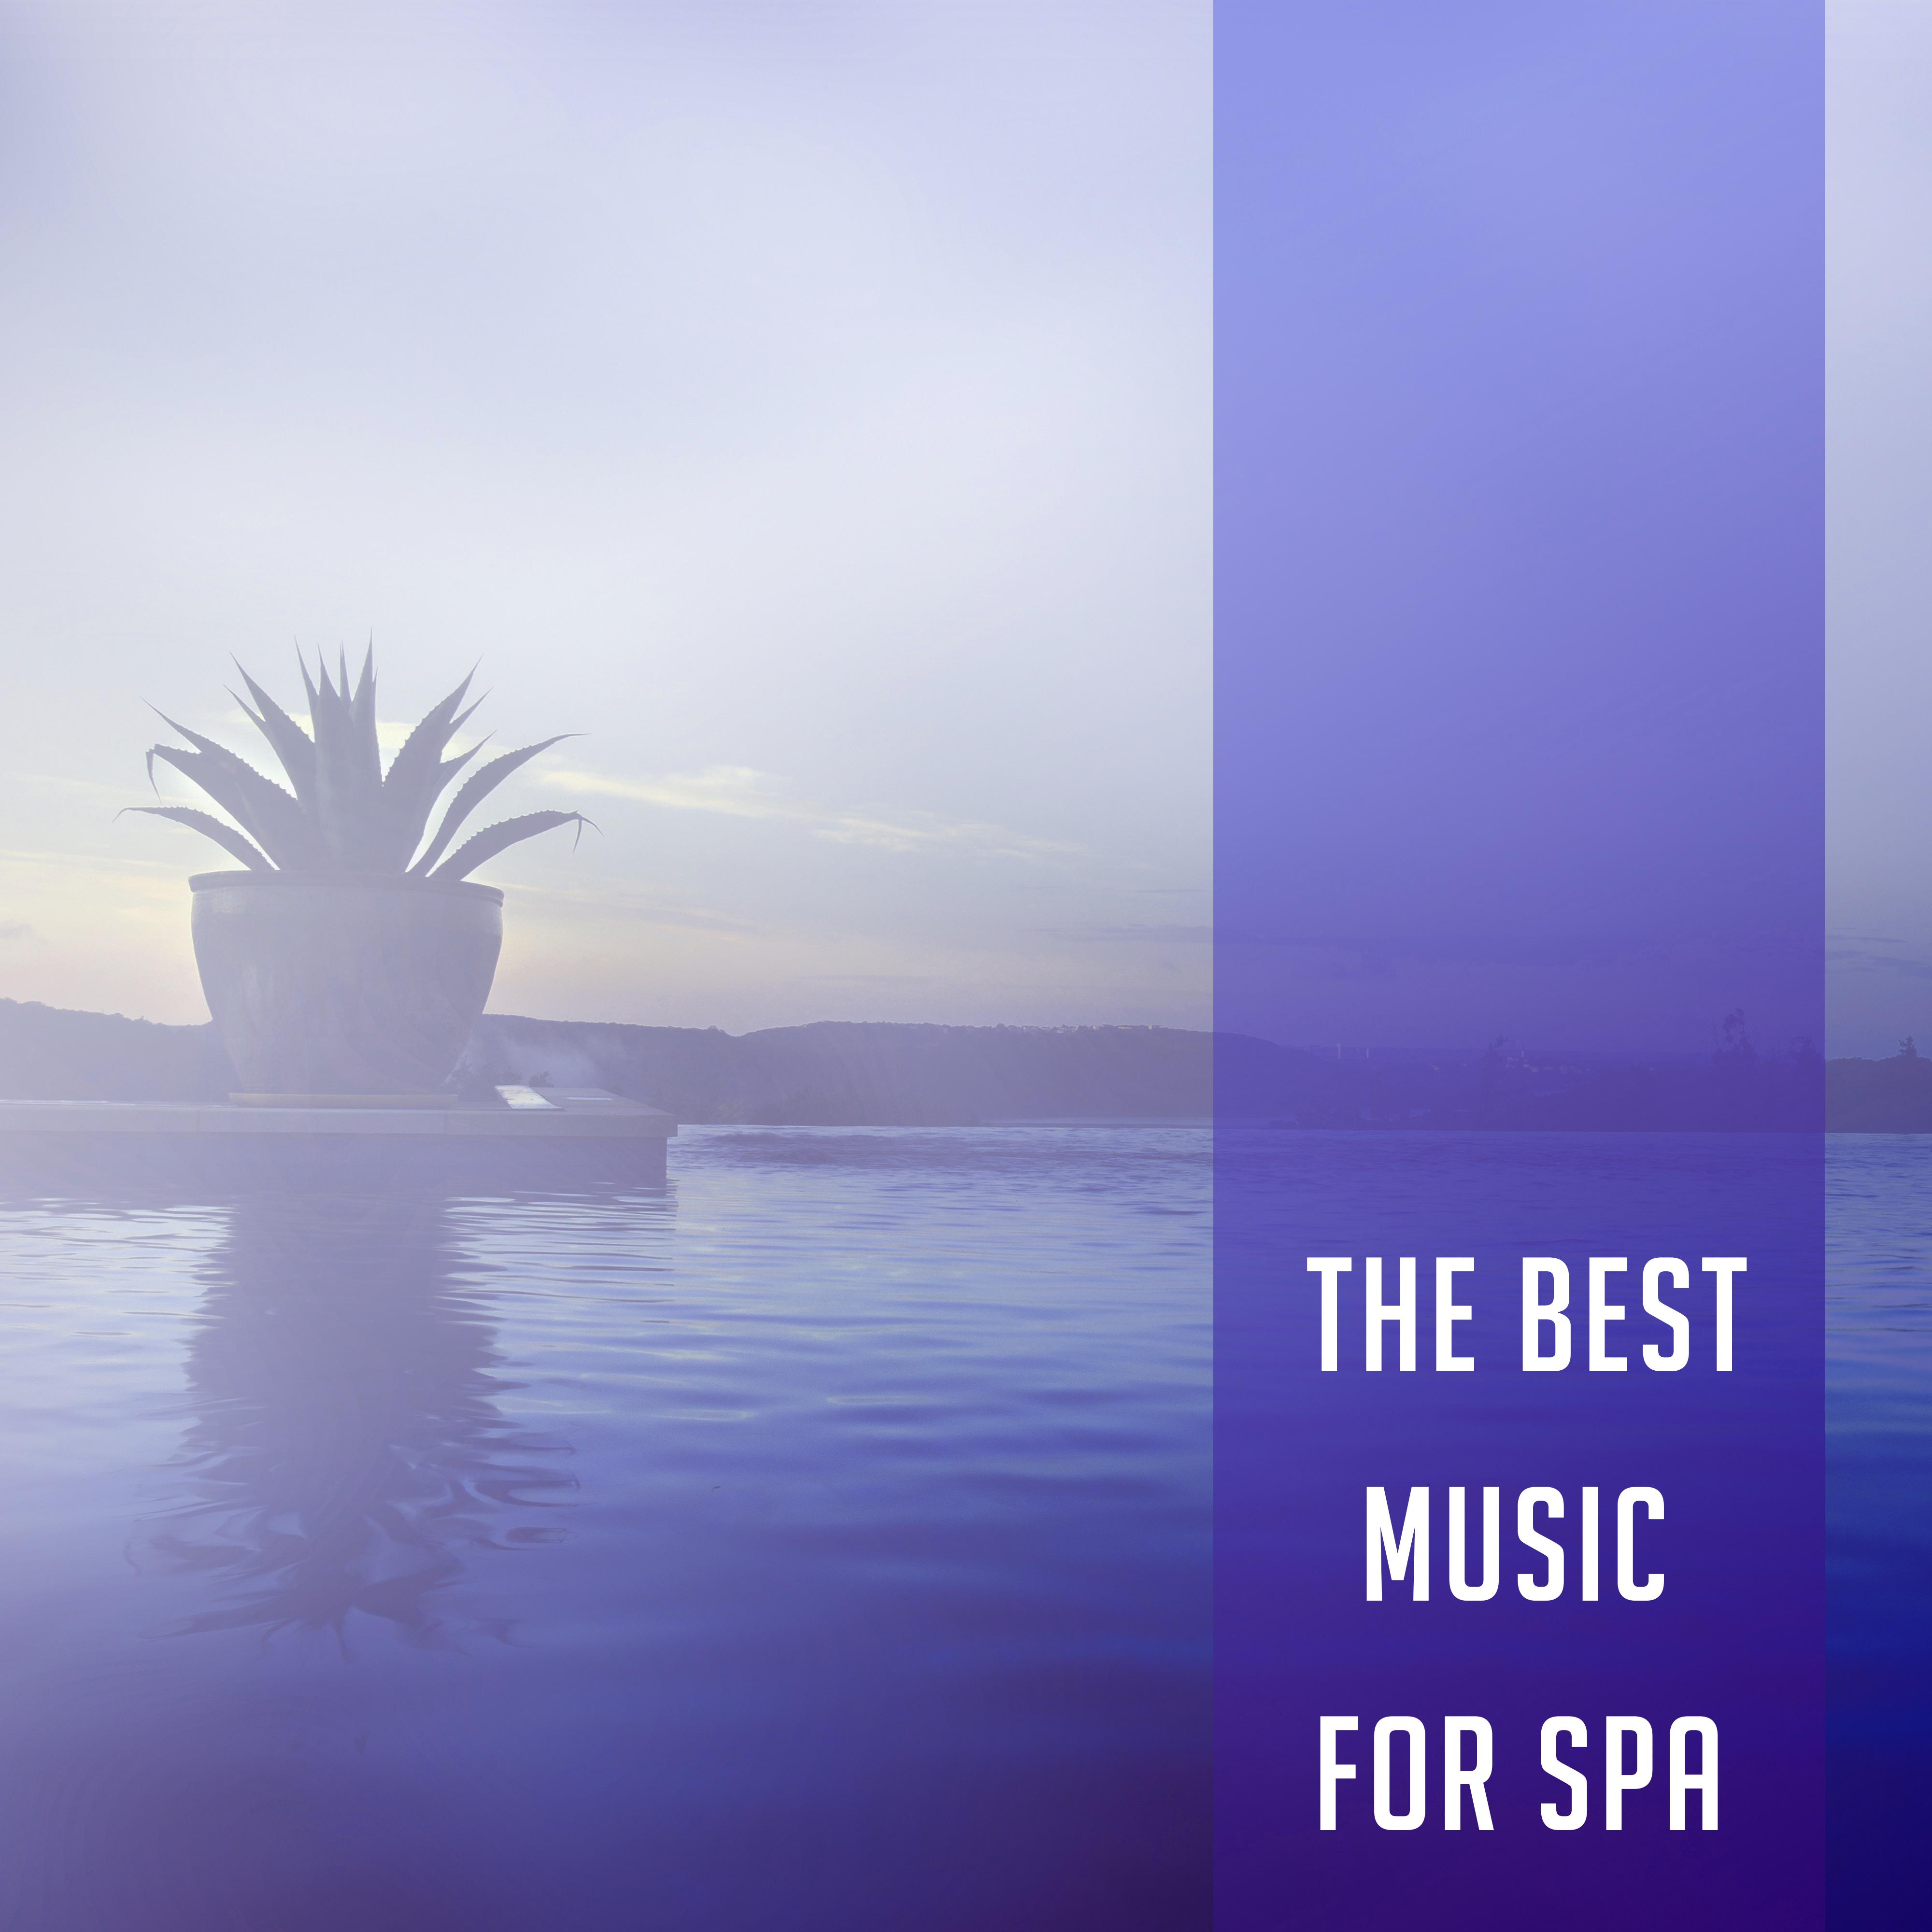 The Best Music for Spa – Relaxation Wellness, Massage Therapy, Soothing Sounds, Healing Body, Anti Stress Music, Spa Dreams, Zen